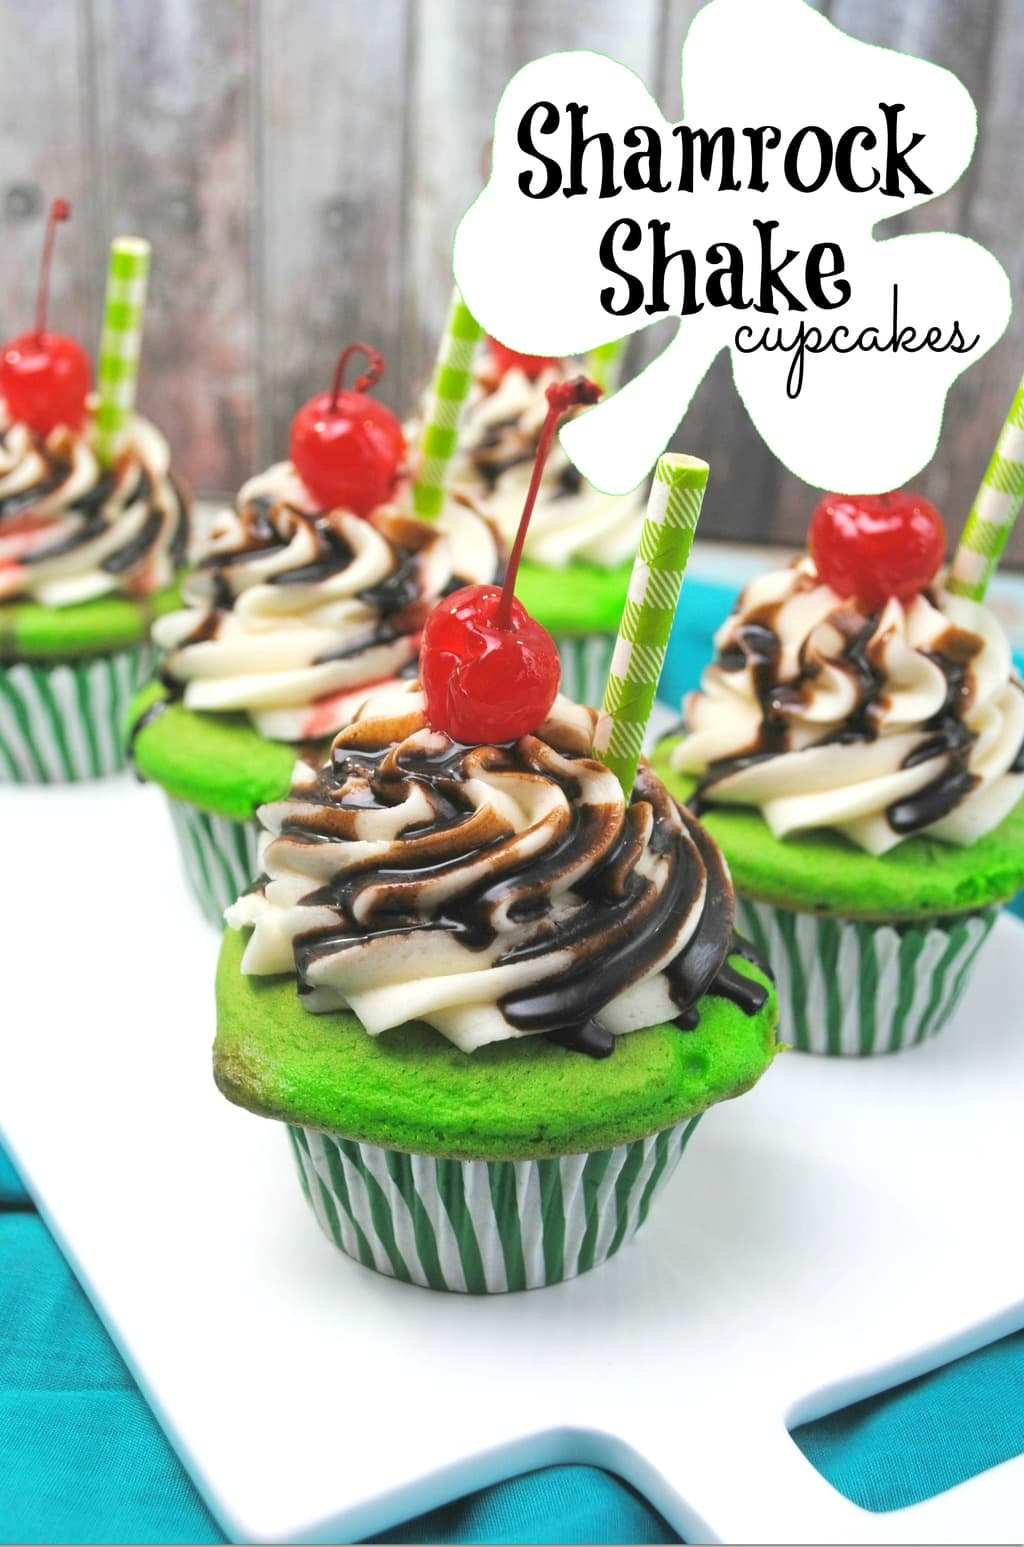 These Shamrock Shake Cupcakes are just too cute and so delicious. Think Thin Mints in a cupcake! As I've said before, cupcakes are my favorite dessert, and if it's an easy recipes, even better! Are you doing anything special for your family for St. Patrick's Day? Make these cupcakes for a special surprise! 